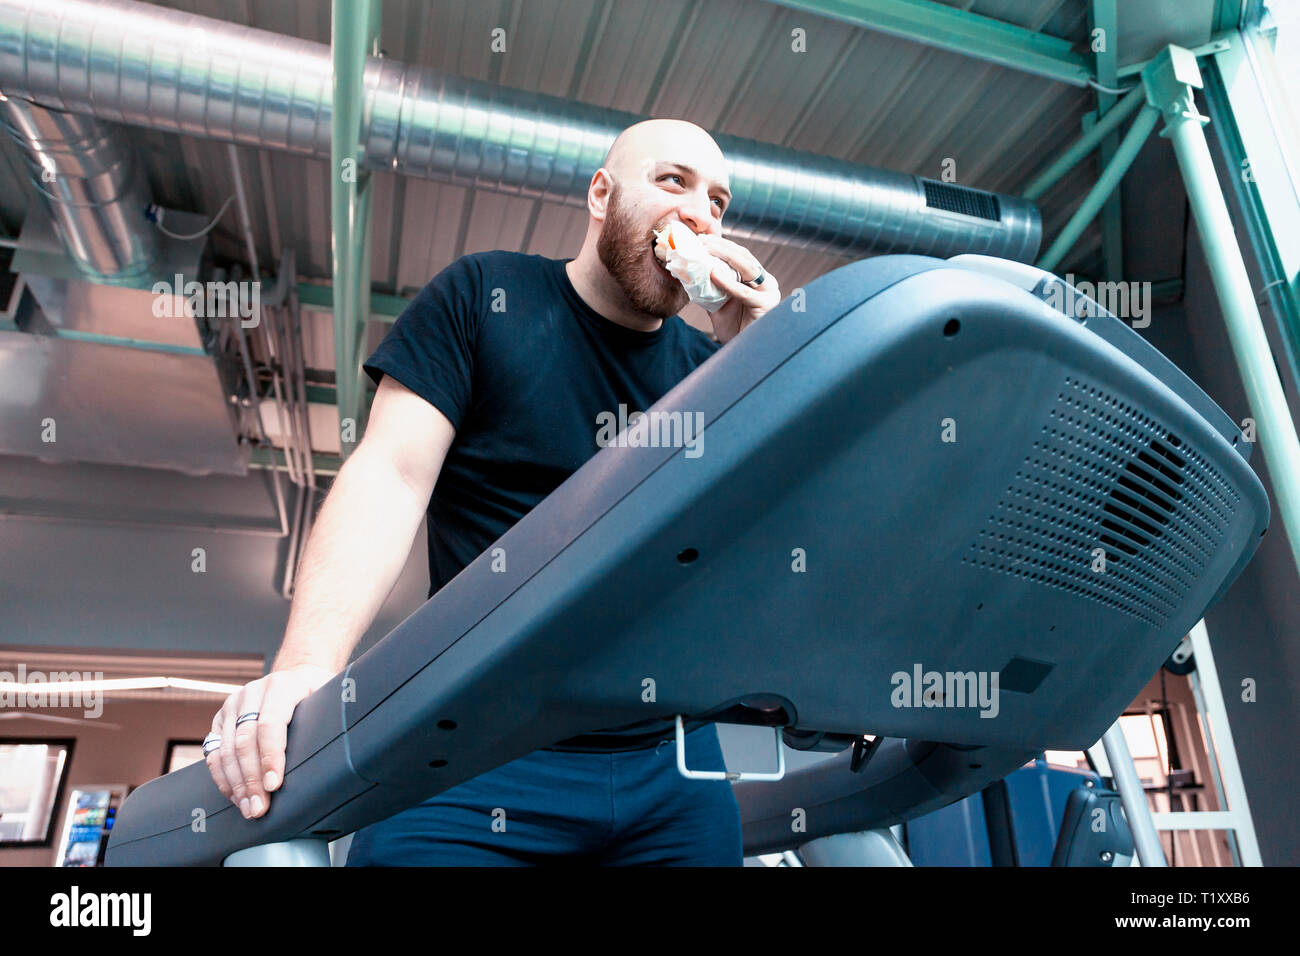 runner athlete while relaxing eating a sandwich on the driving machinery in the gym Stock Photo